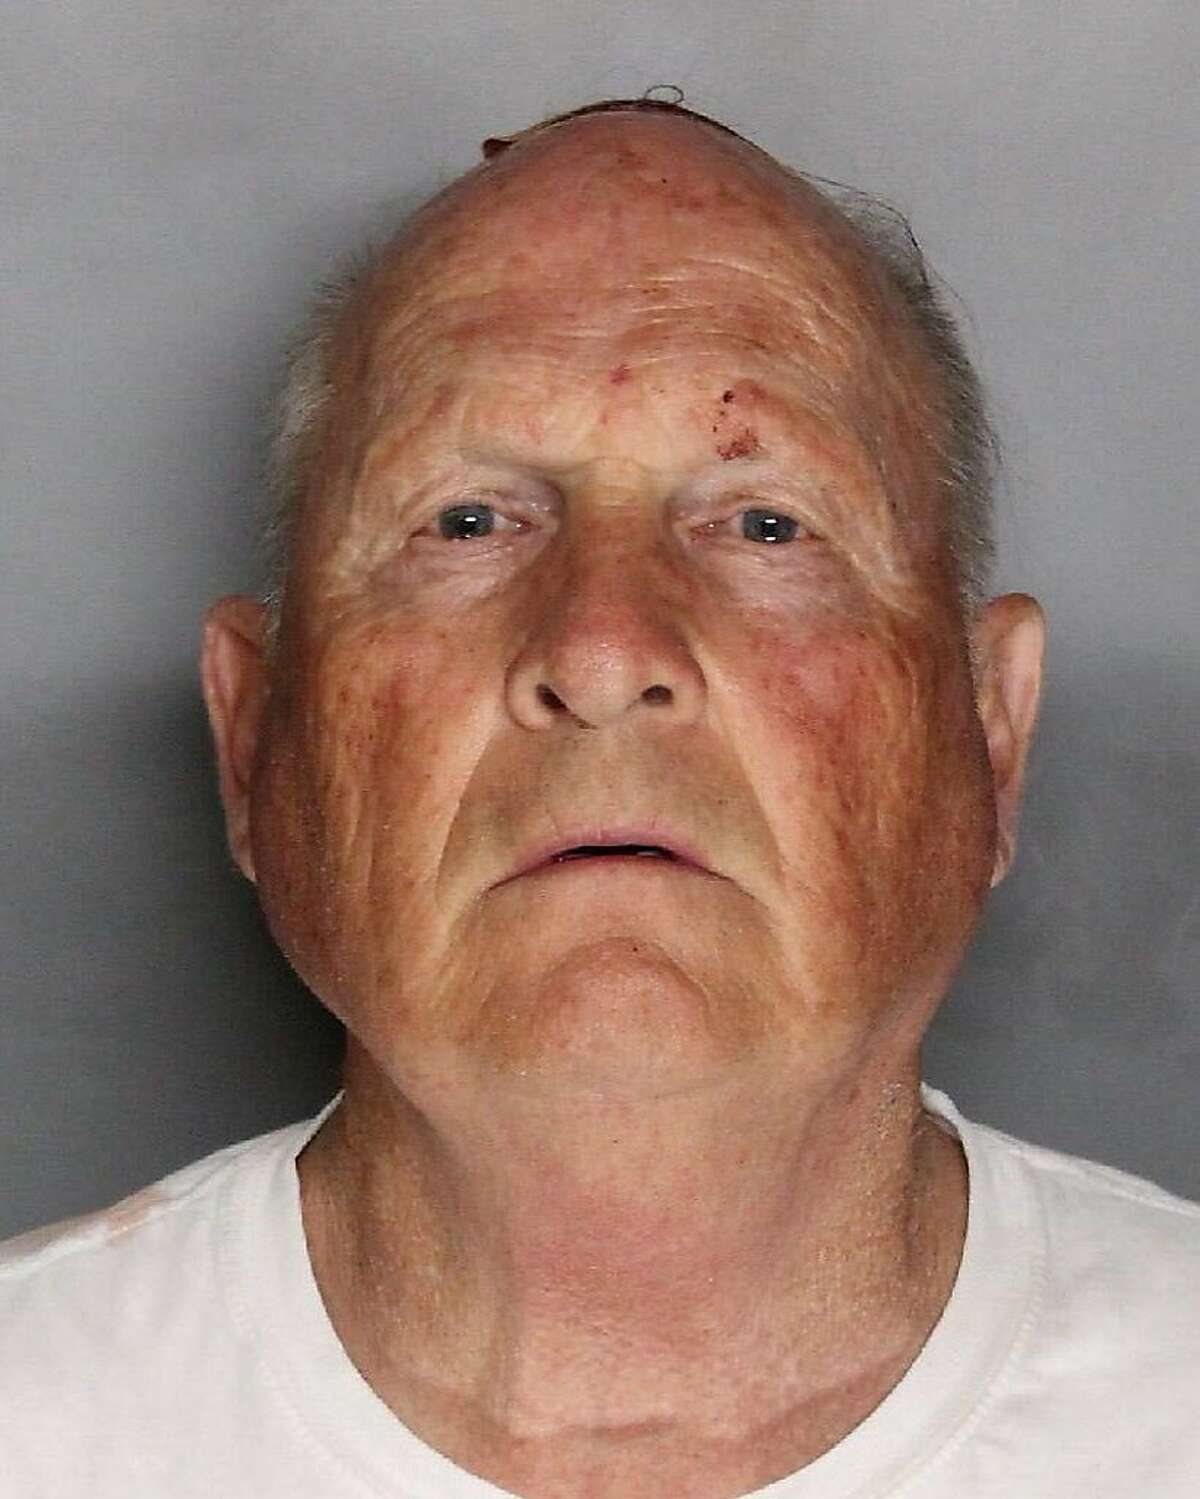 In a booking photo provided by the Sacramento County Sheriff's Department, Joseph James DeAngelo, a former police officer who was arrested on two counts of murder on April 25, 2018. Authorities said they believe that DeAngelo is the so-called Golden State Killer, a serial rapist and murderer who terrorized communities in California in the 1970s and 1980s. (Sacramento County Sheriff's Department via The New York Times) -- FOR EDITORIAL USE ONLY --